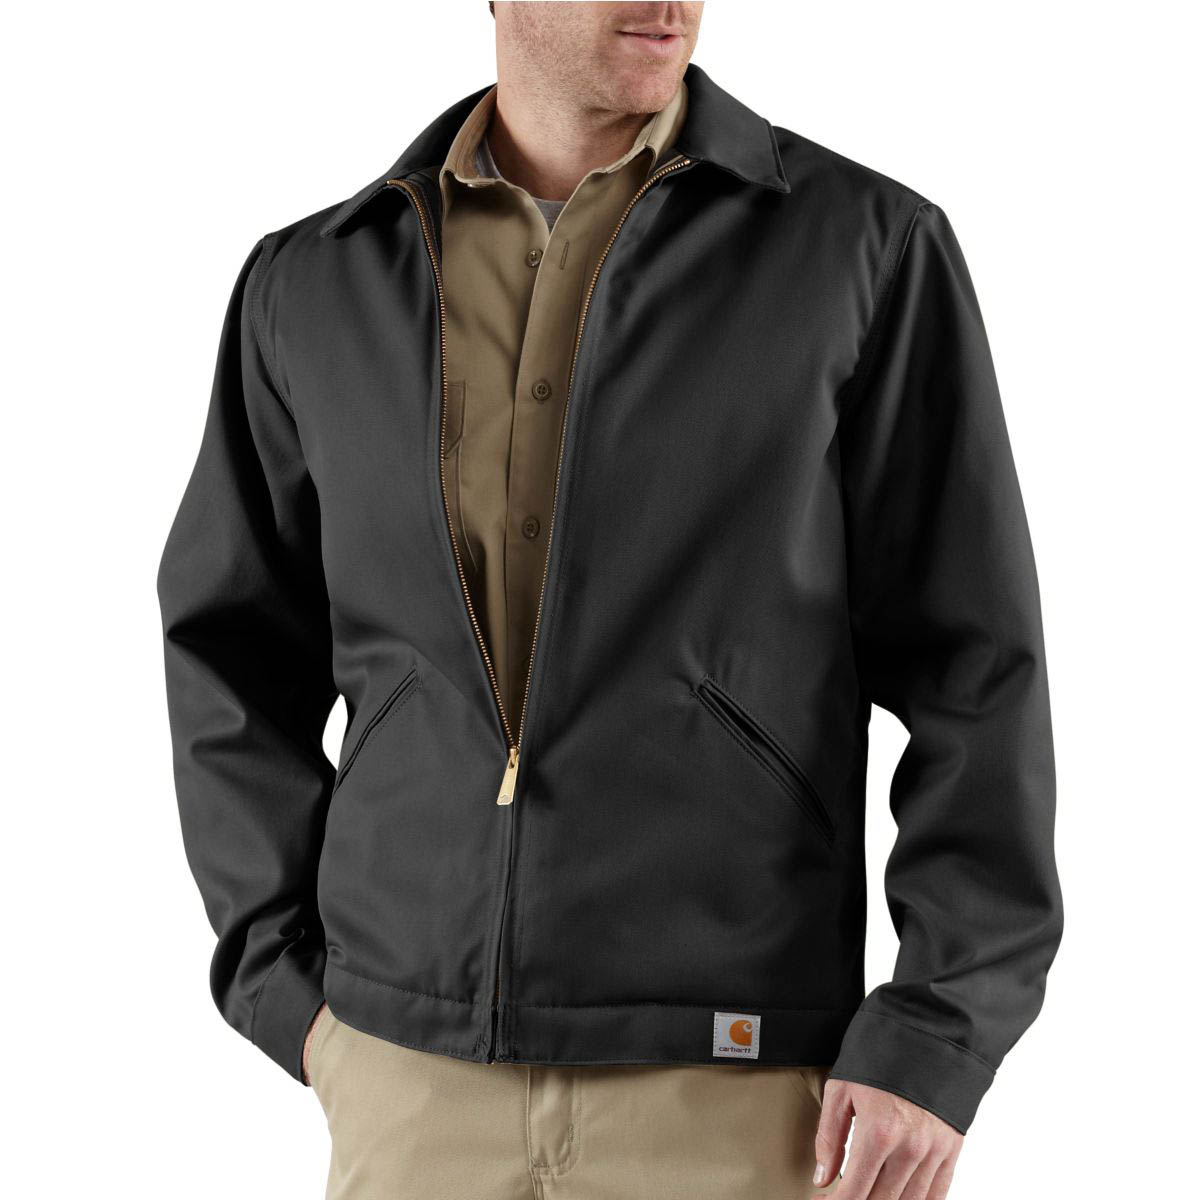 Carhartt Mens Blended Twill Work Jacket Midweight Quilt Lined